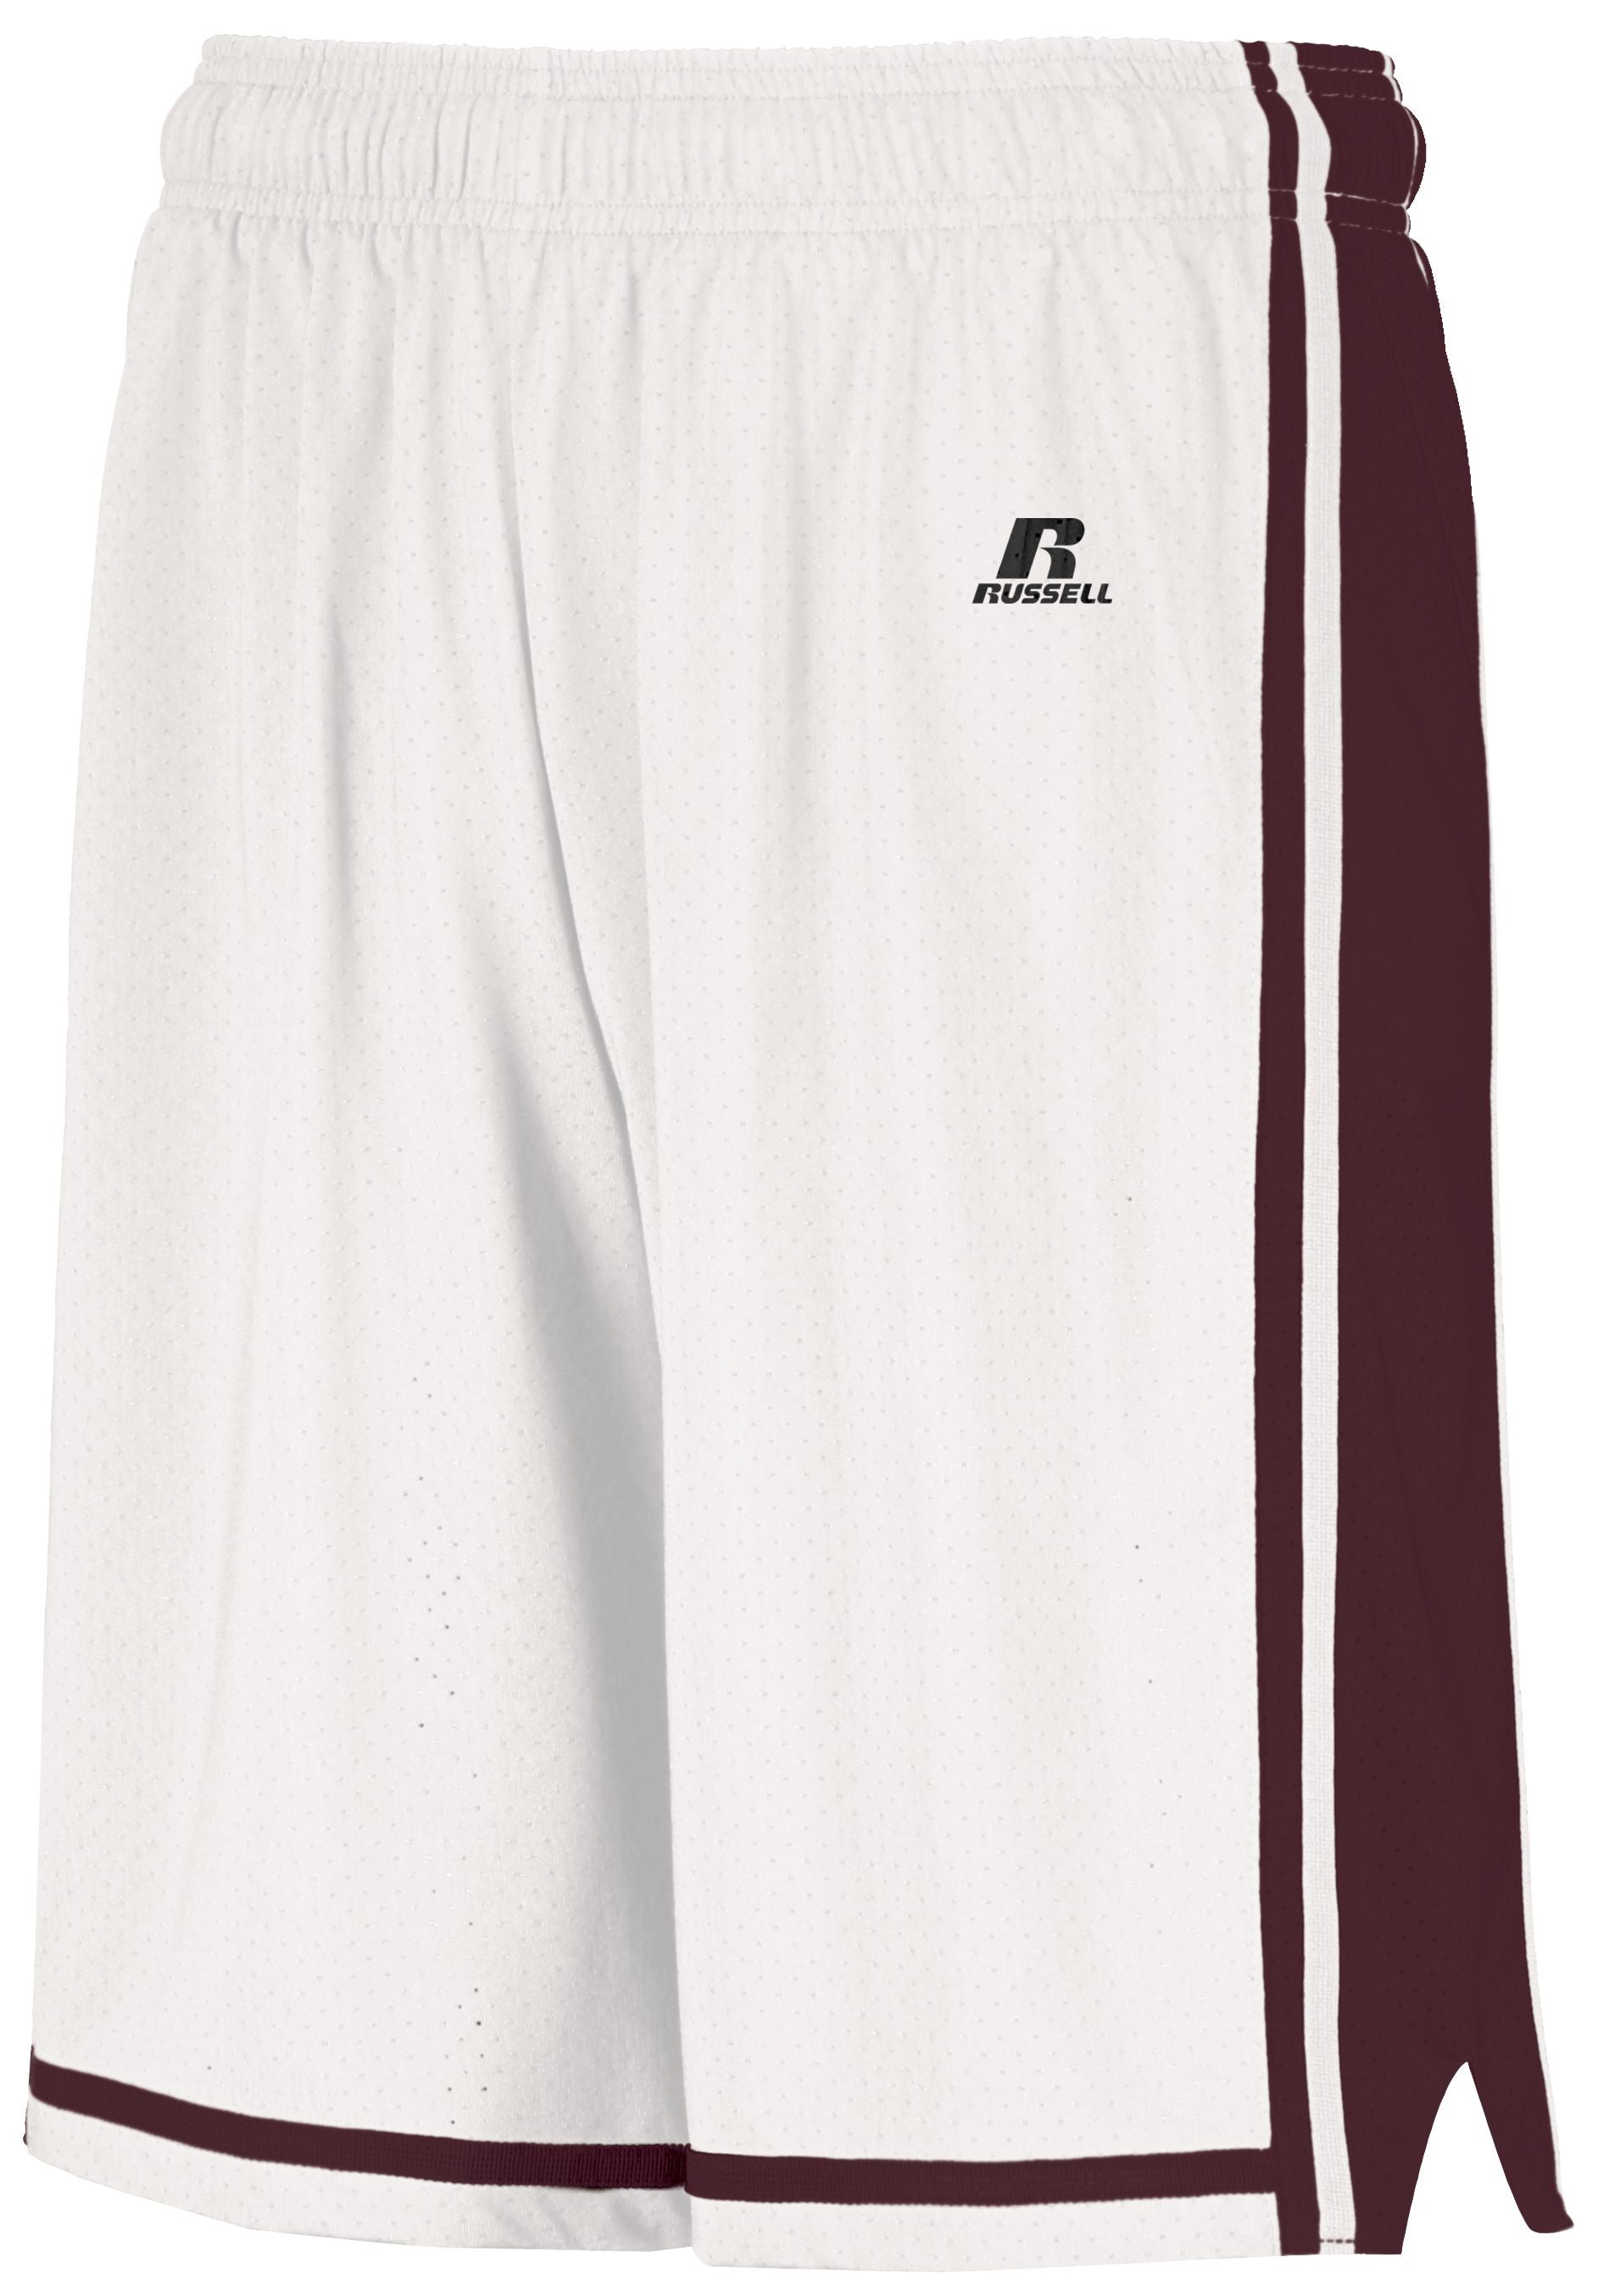 Russell Athletic Youth Legacy Basketball Shorts in White/Maroon  -Part of the Youth, Youth-Shorts, Basketball, Russell-Athletic-Products, All-Sports, All-Sports-1 product lines at KanaleyCreations.com